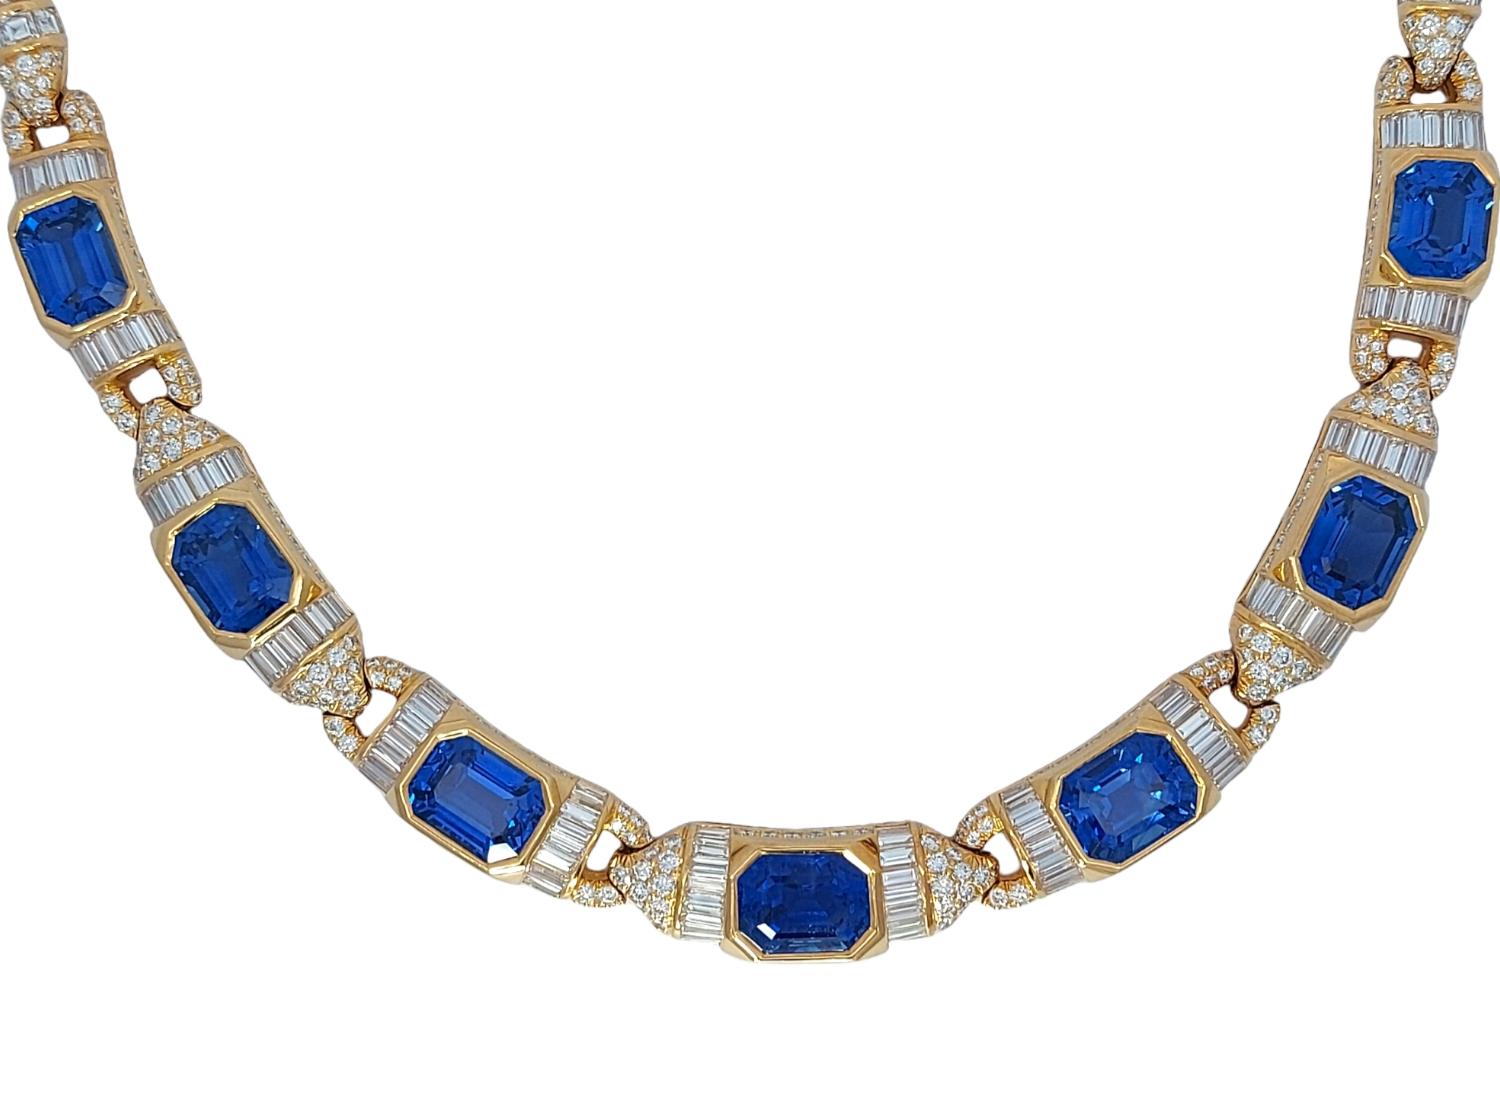 Emerald Cut GRS 18kt Necklace 41.6 ct NH Sapphires & Diamond to His Majesty Qaboos Bin Said For Sale